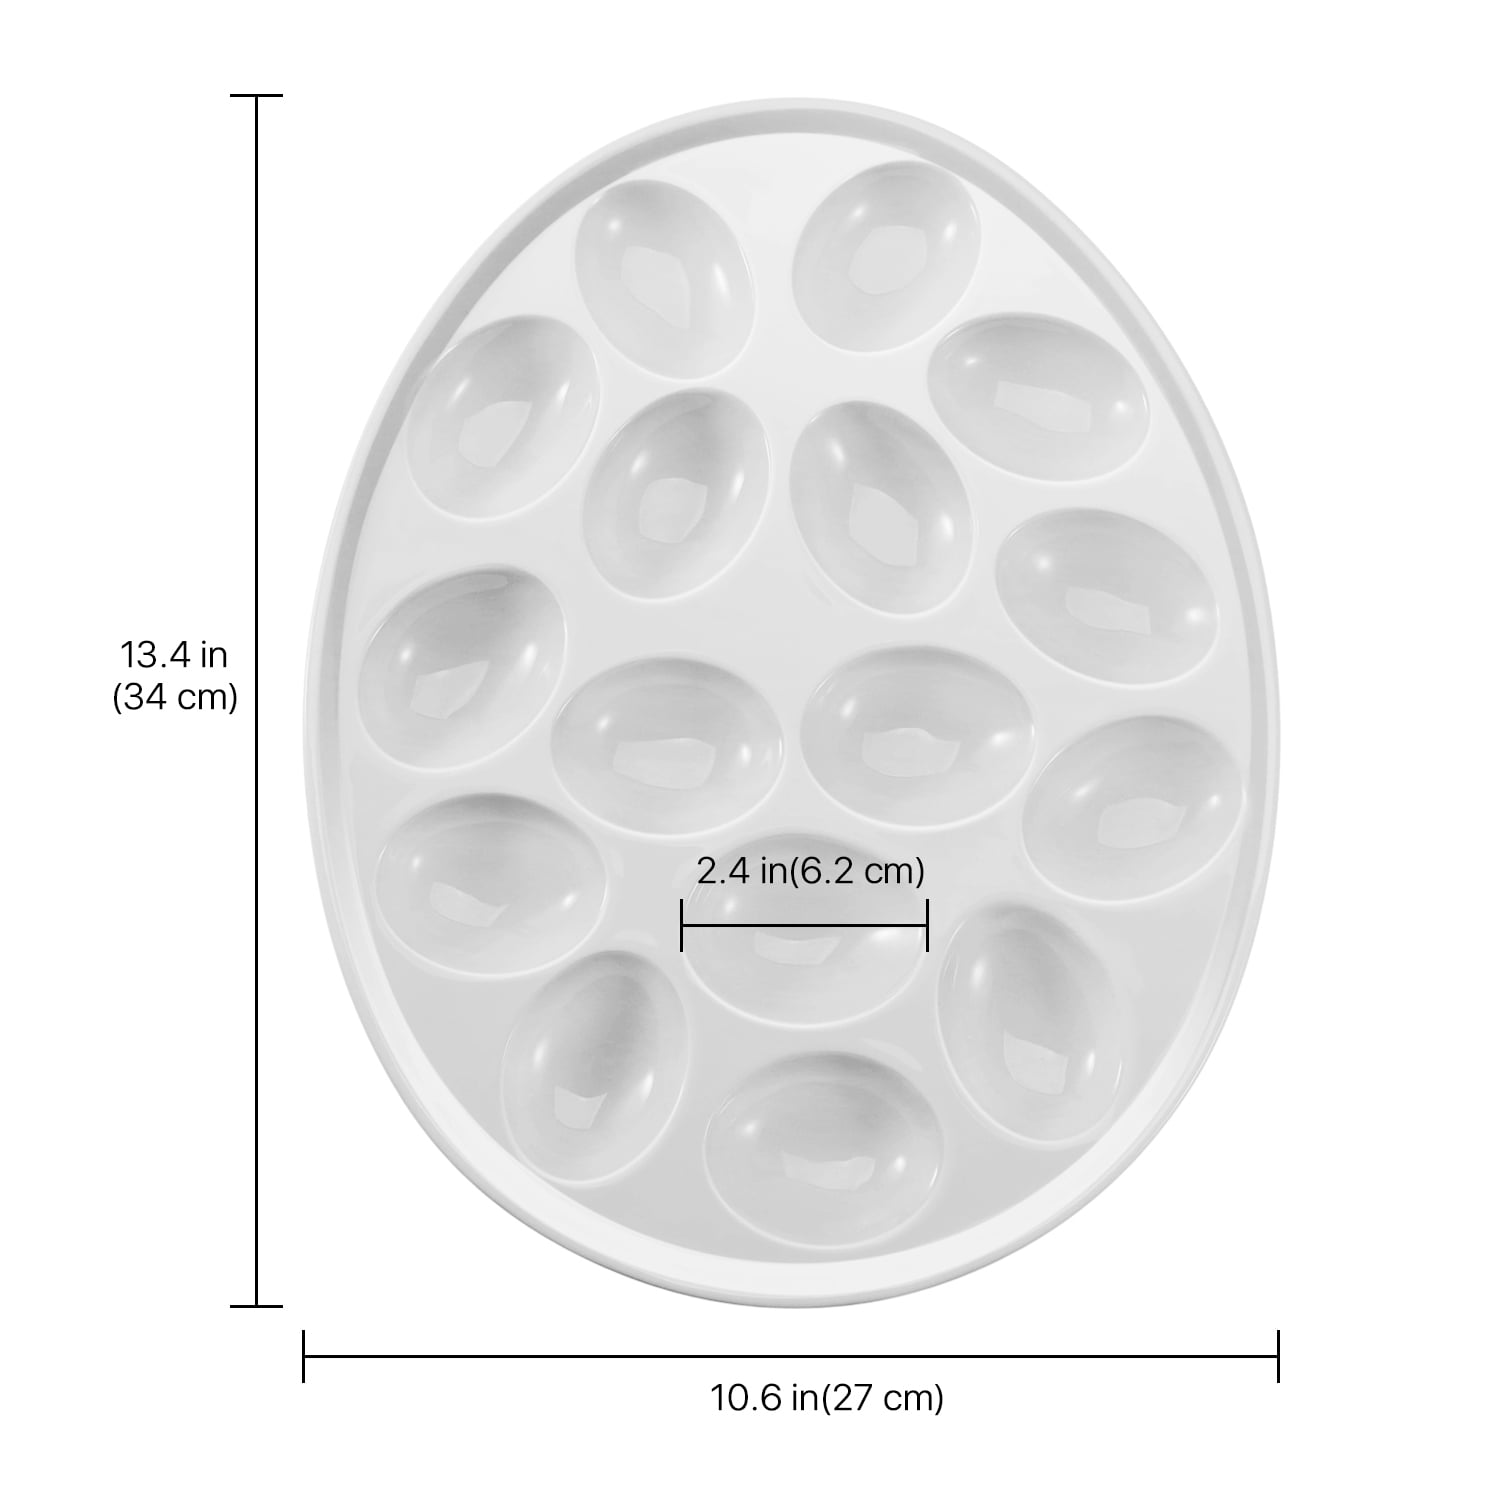 DOWAN 12.6-inch Porcelain Deviled Egg Dish/Egg Platter with 25-Compartment Round&White 